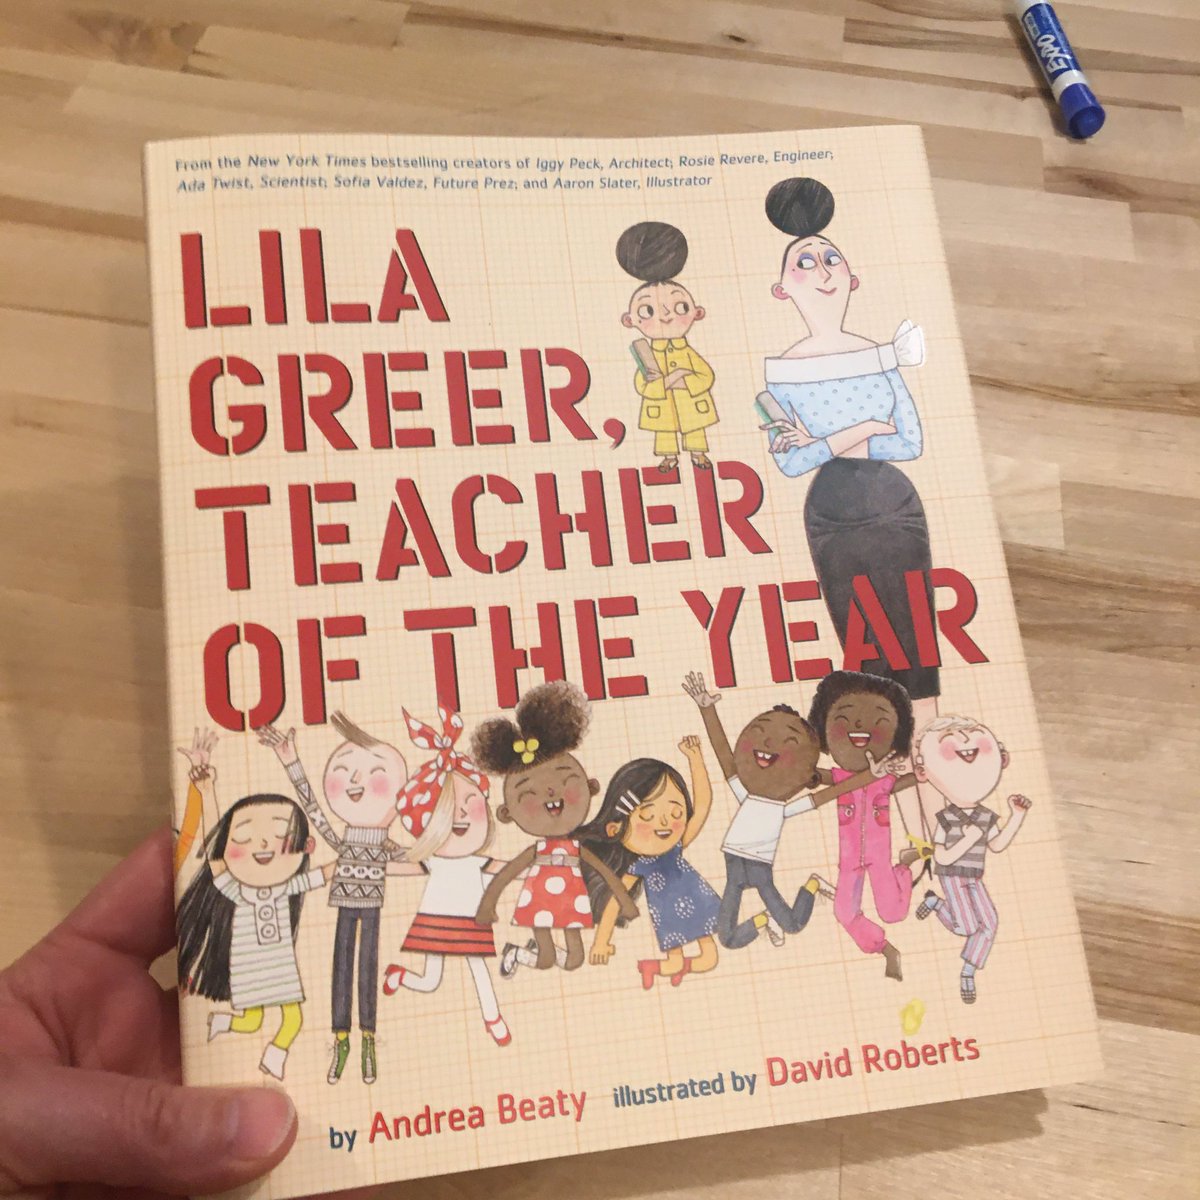 Giveaway for Reading Month! I got a signed copy of Andrea Beaty’s inspiring new book about Lila Greer! To enter: ✅RT & follow @andreabeaty ➕Get an extra entry by sharing your favorite character, project, or idea from her other books (Ada Twist, Rosie Revere, etc)